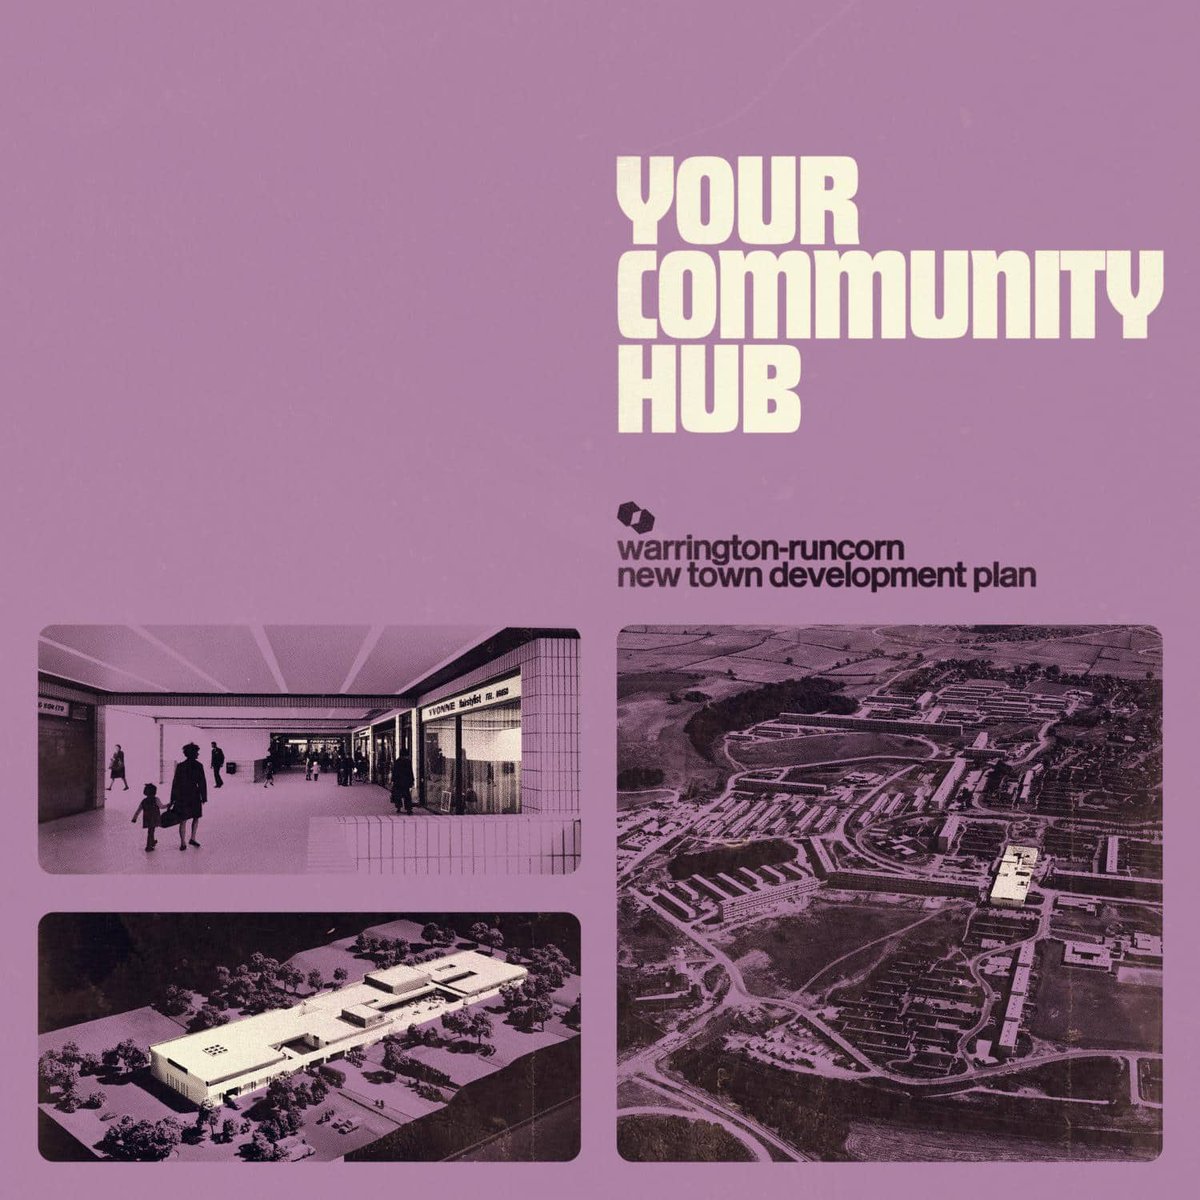 ALBUM OF THE WEEK: 'Your Community Hub' by Warrington-Runcorn New Town Development Plan Delivering a speechless form of contempt rather than a rallying call to arms, @RuncornPlan’s latest serves as his meditation on the ‘state of things’ @CastlesInSpace normanrecords.com/features/best-…